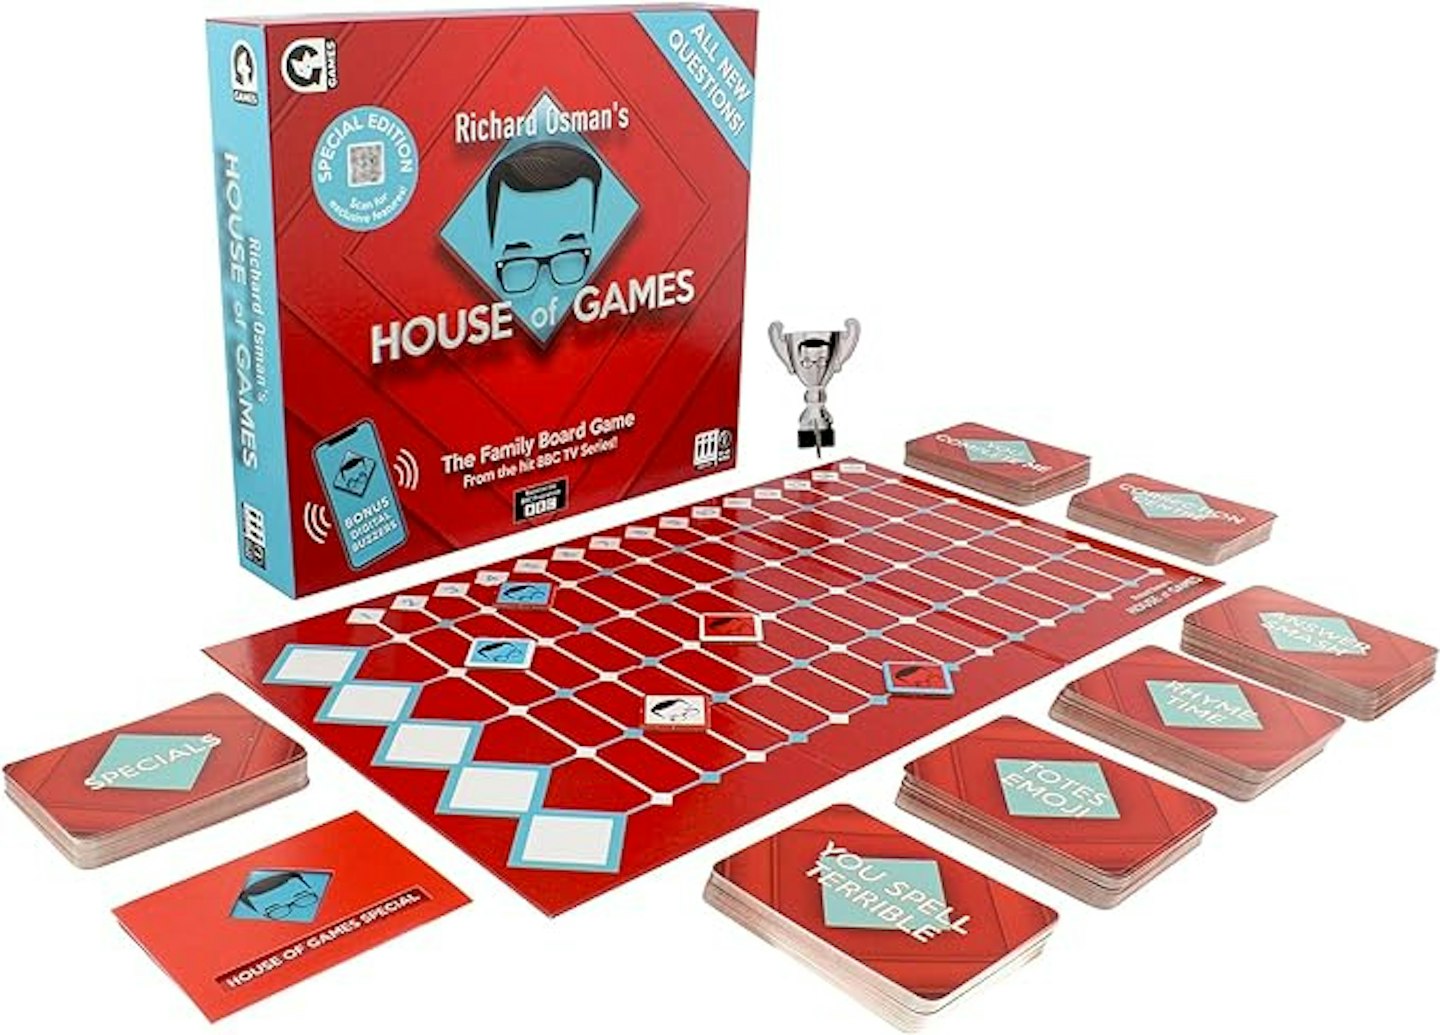 Richard Osman’s House of Games board game box and contents